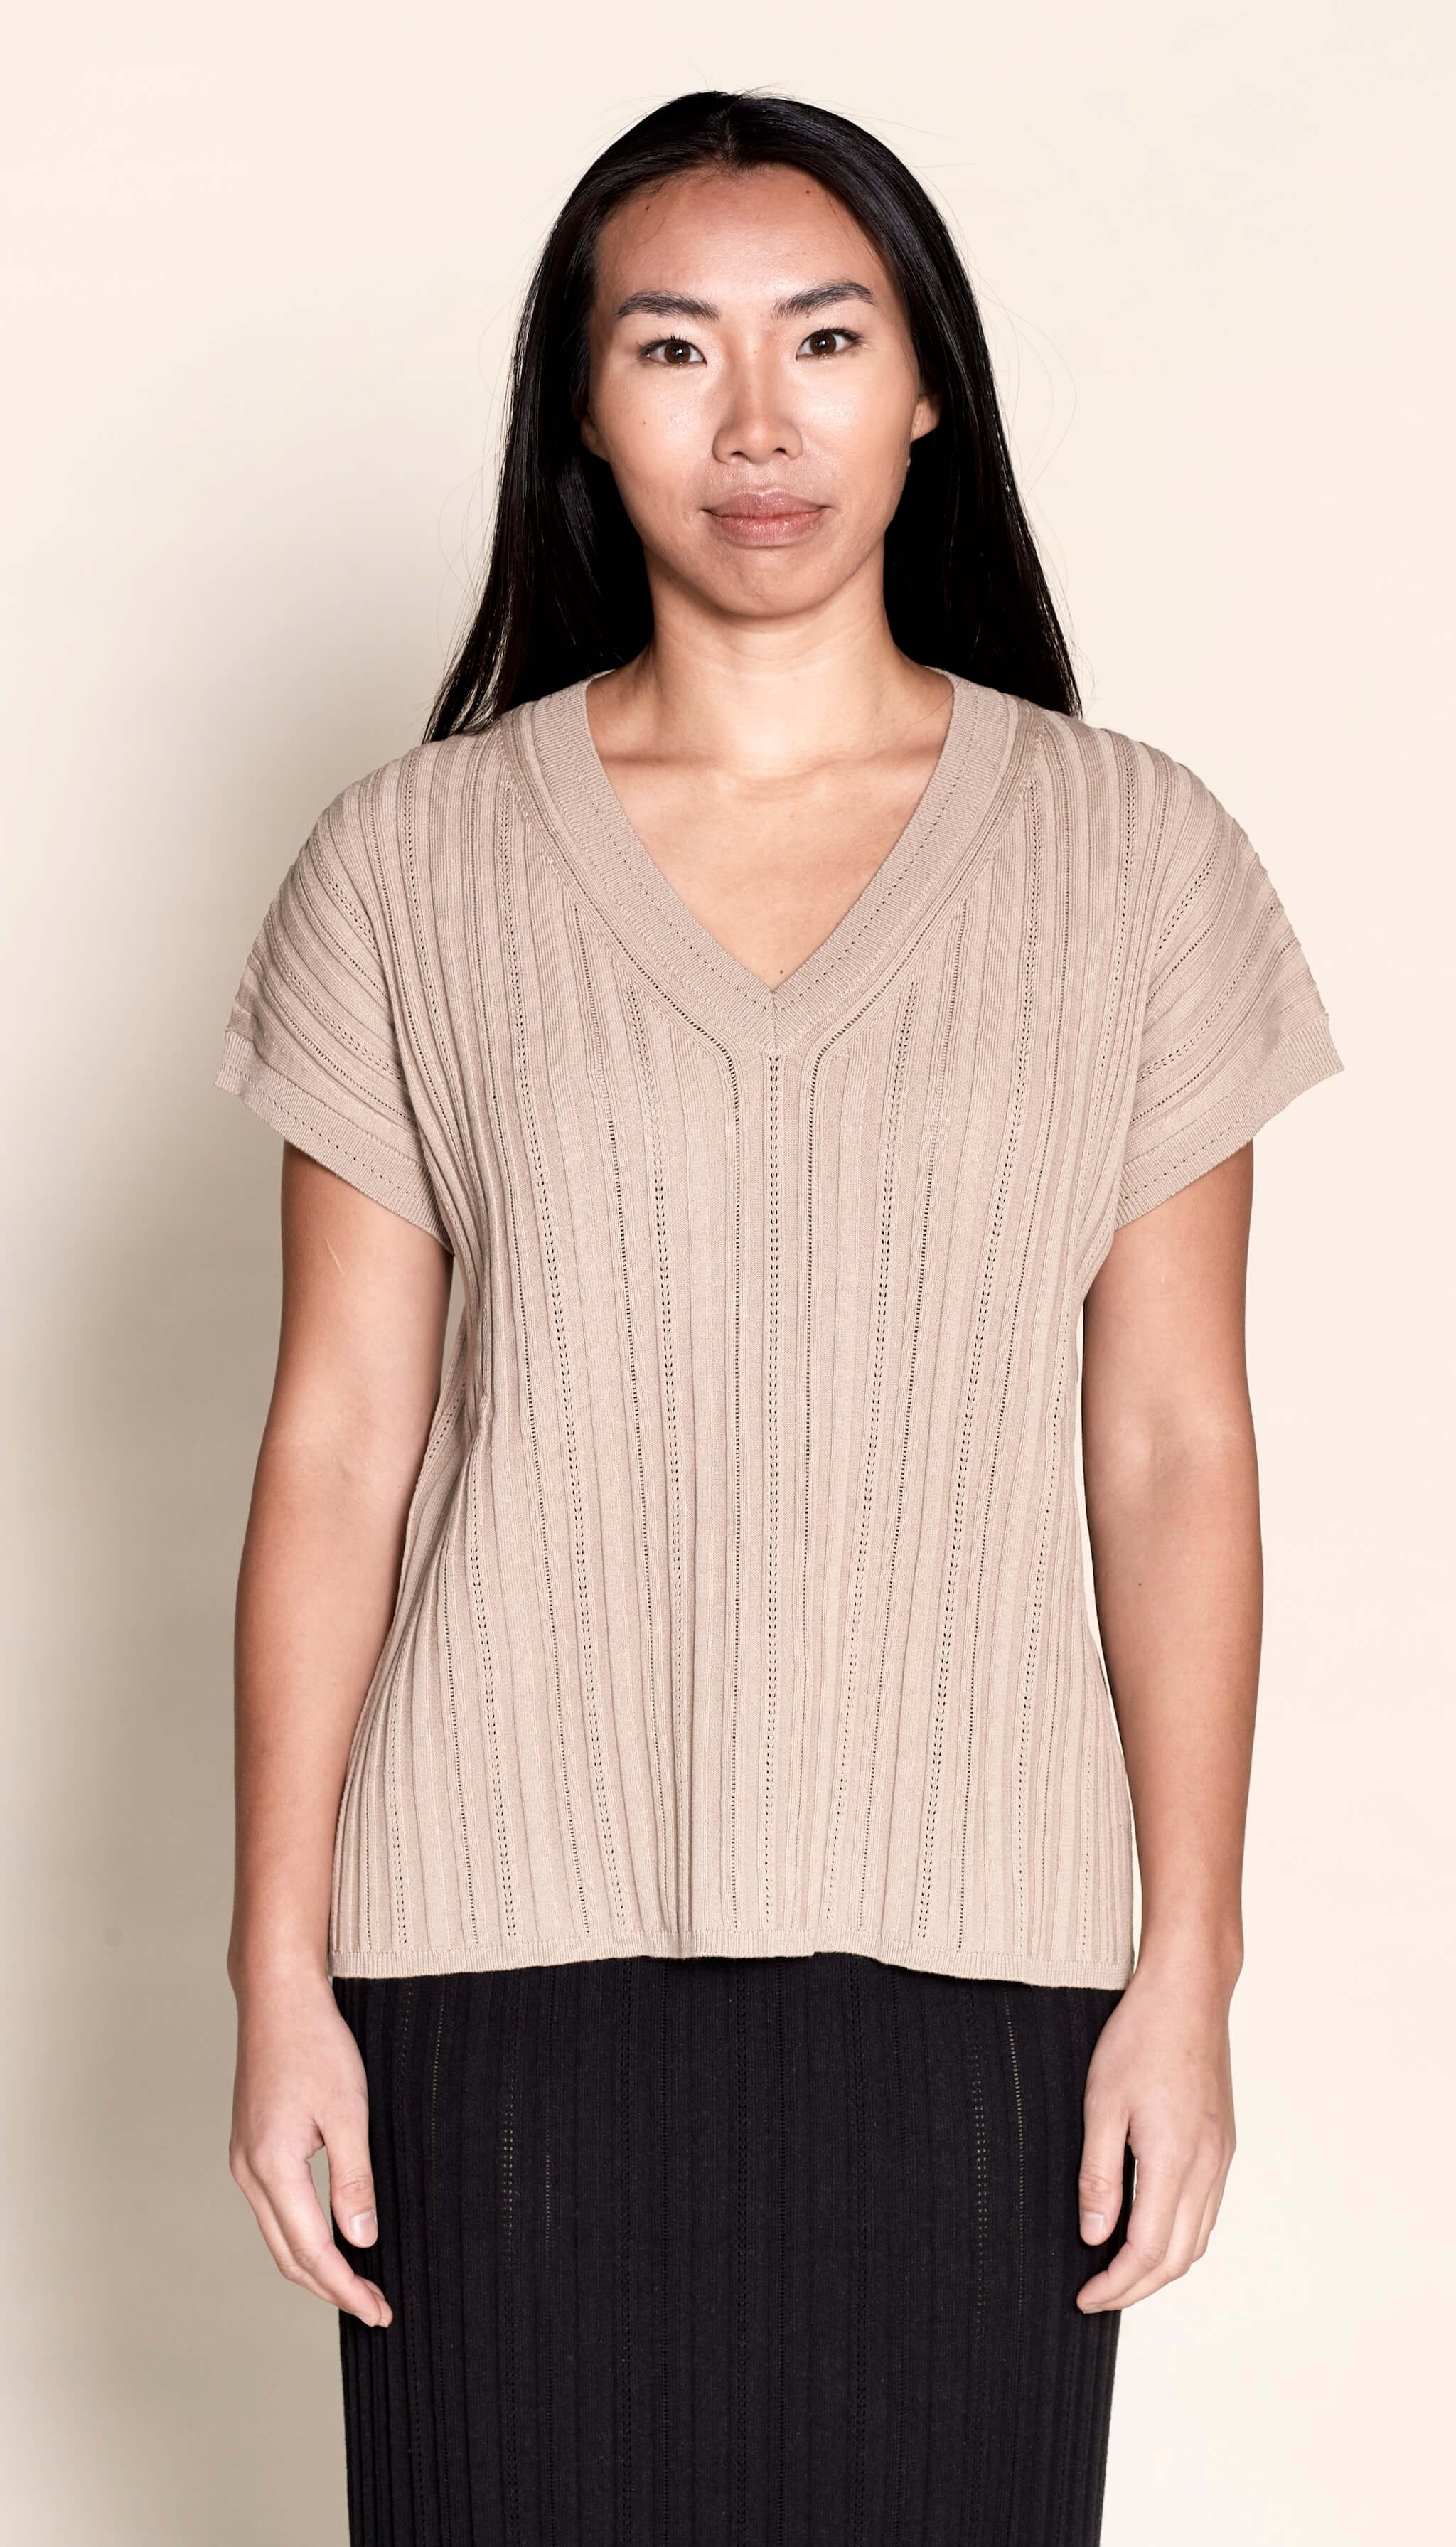 Model presents a taupe V-neck knit top by Cyme Copenhagen, exemplifying the blend of sustainable fashion with Danish designer expertise, available in a clothing store that caters to fashion-forward and plus-size women's clothes.